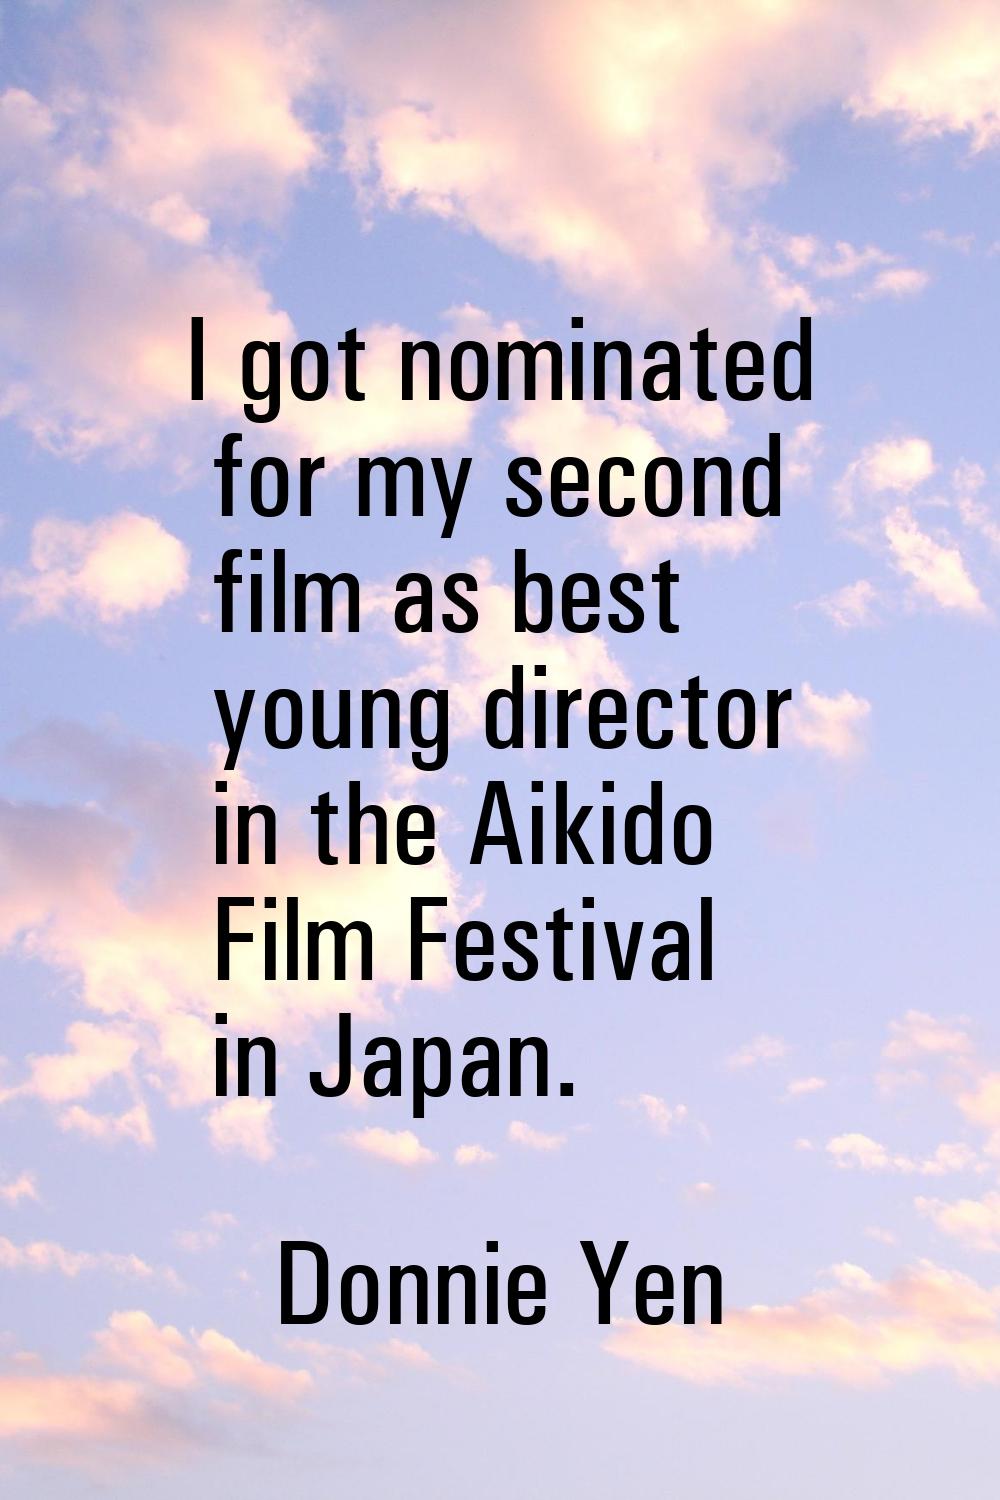 I got nominated for my second film as best young director in the Aikido Film Festival in Japan.